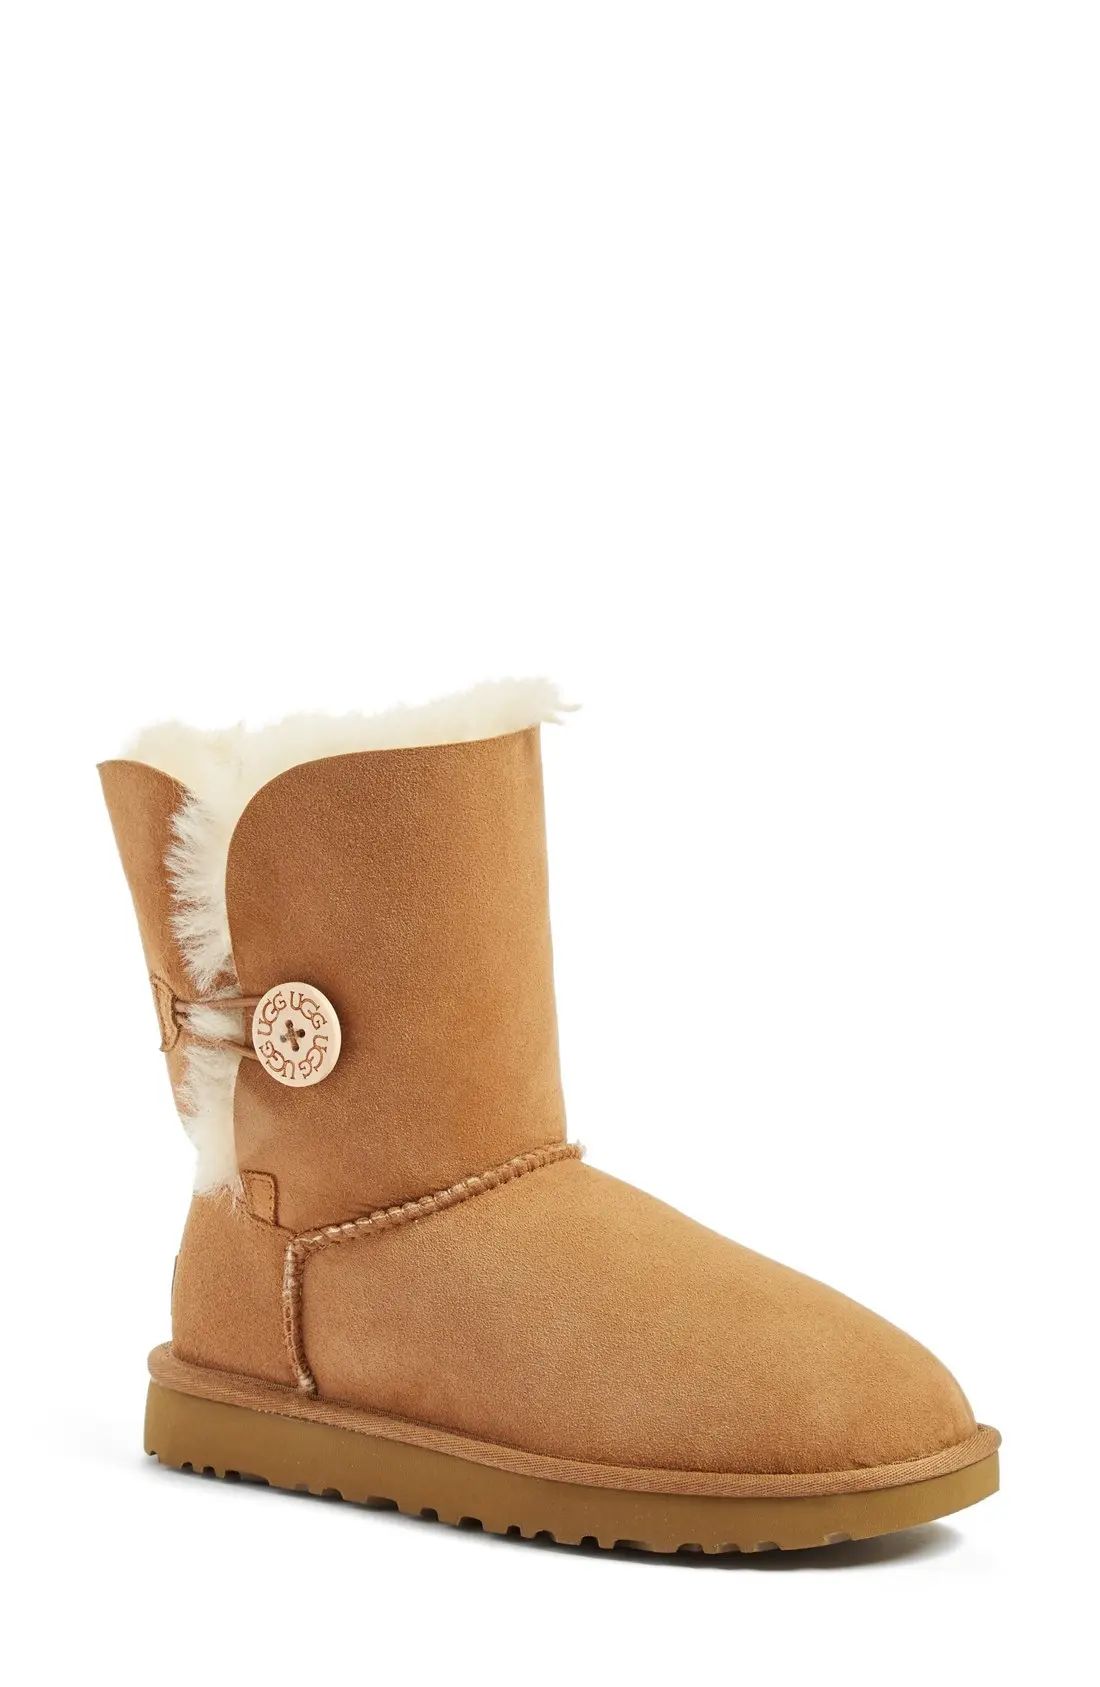 'Bailey Button II' Boot | Nordstrom